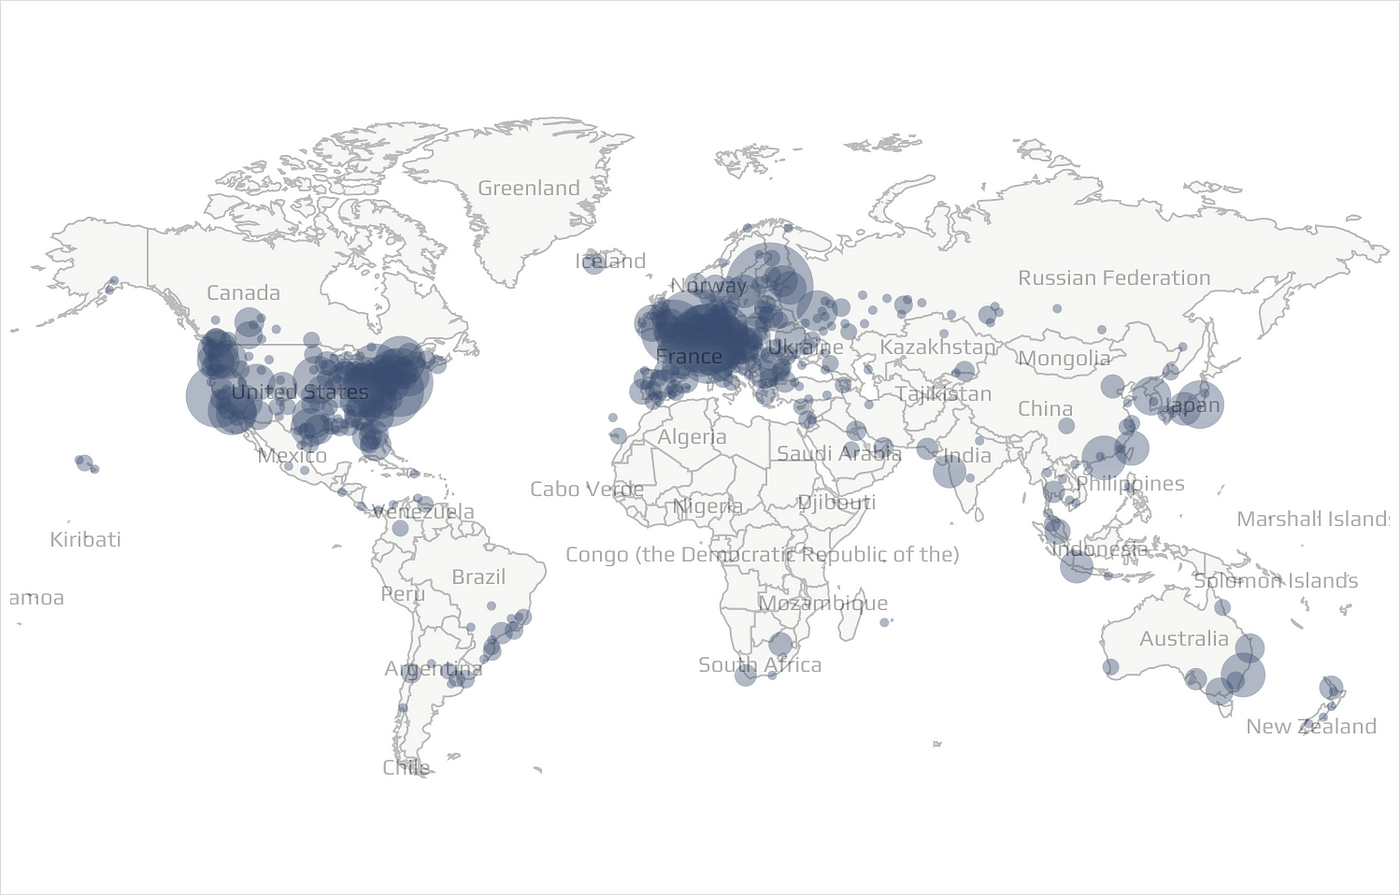 Map shows the concentration of reachable Bitcoin nodes found in countries around the world